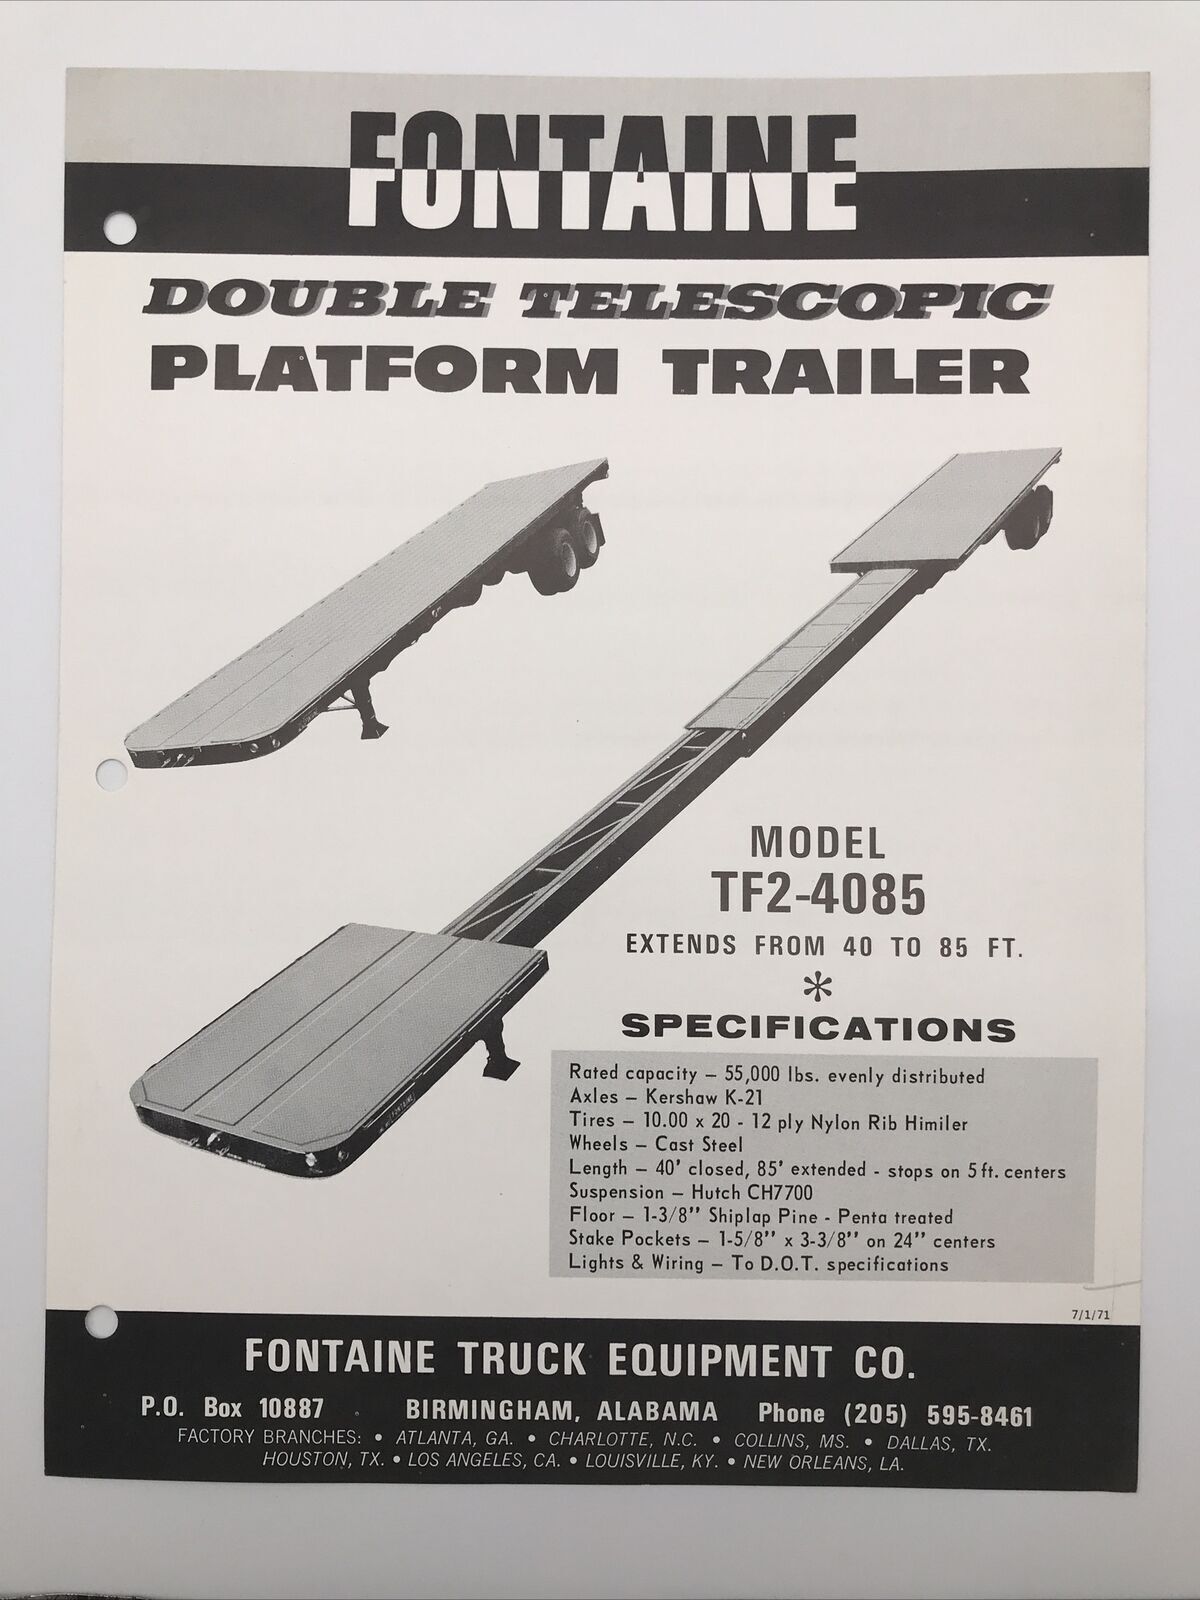 1971 FONTAINE DOUBLE TELESCOPIC PLATFORM TRAILER Model TF2-4085 Specifications